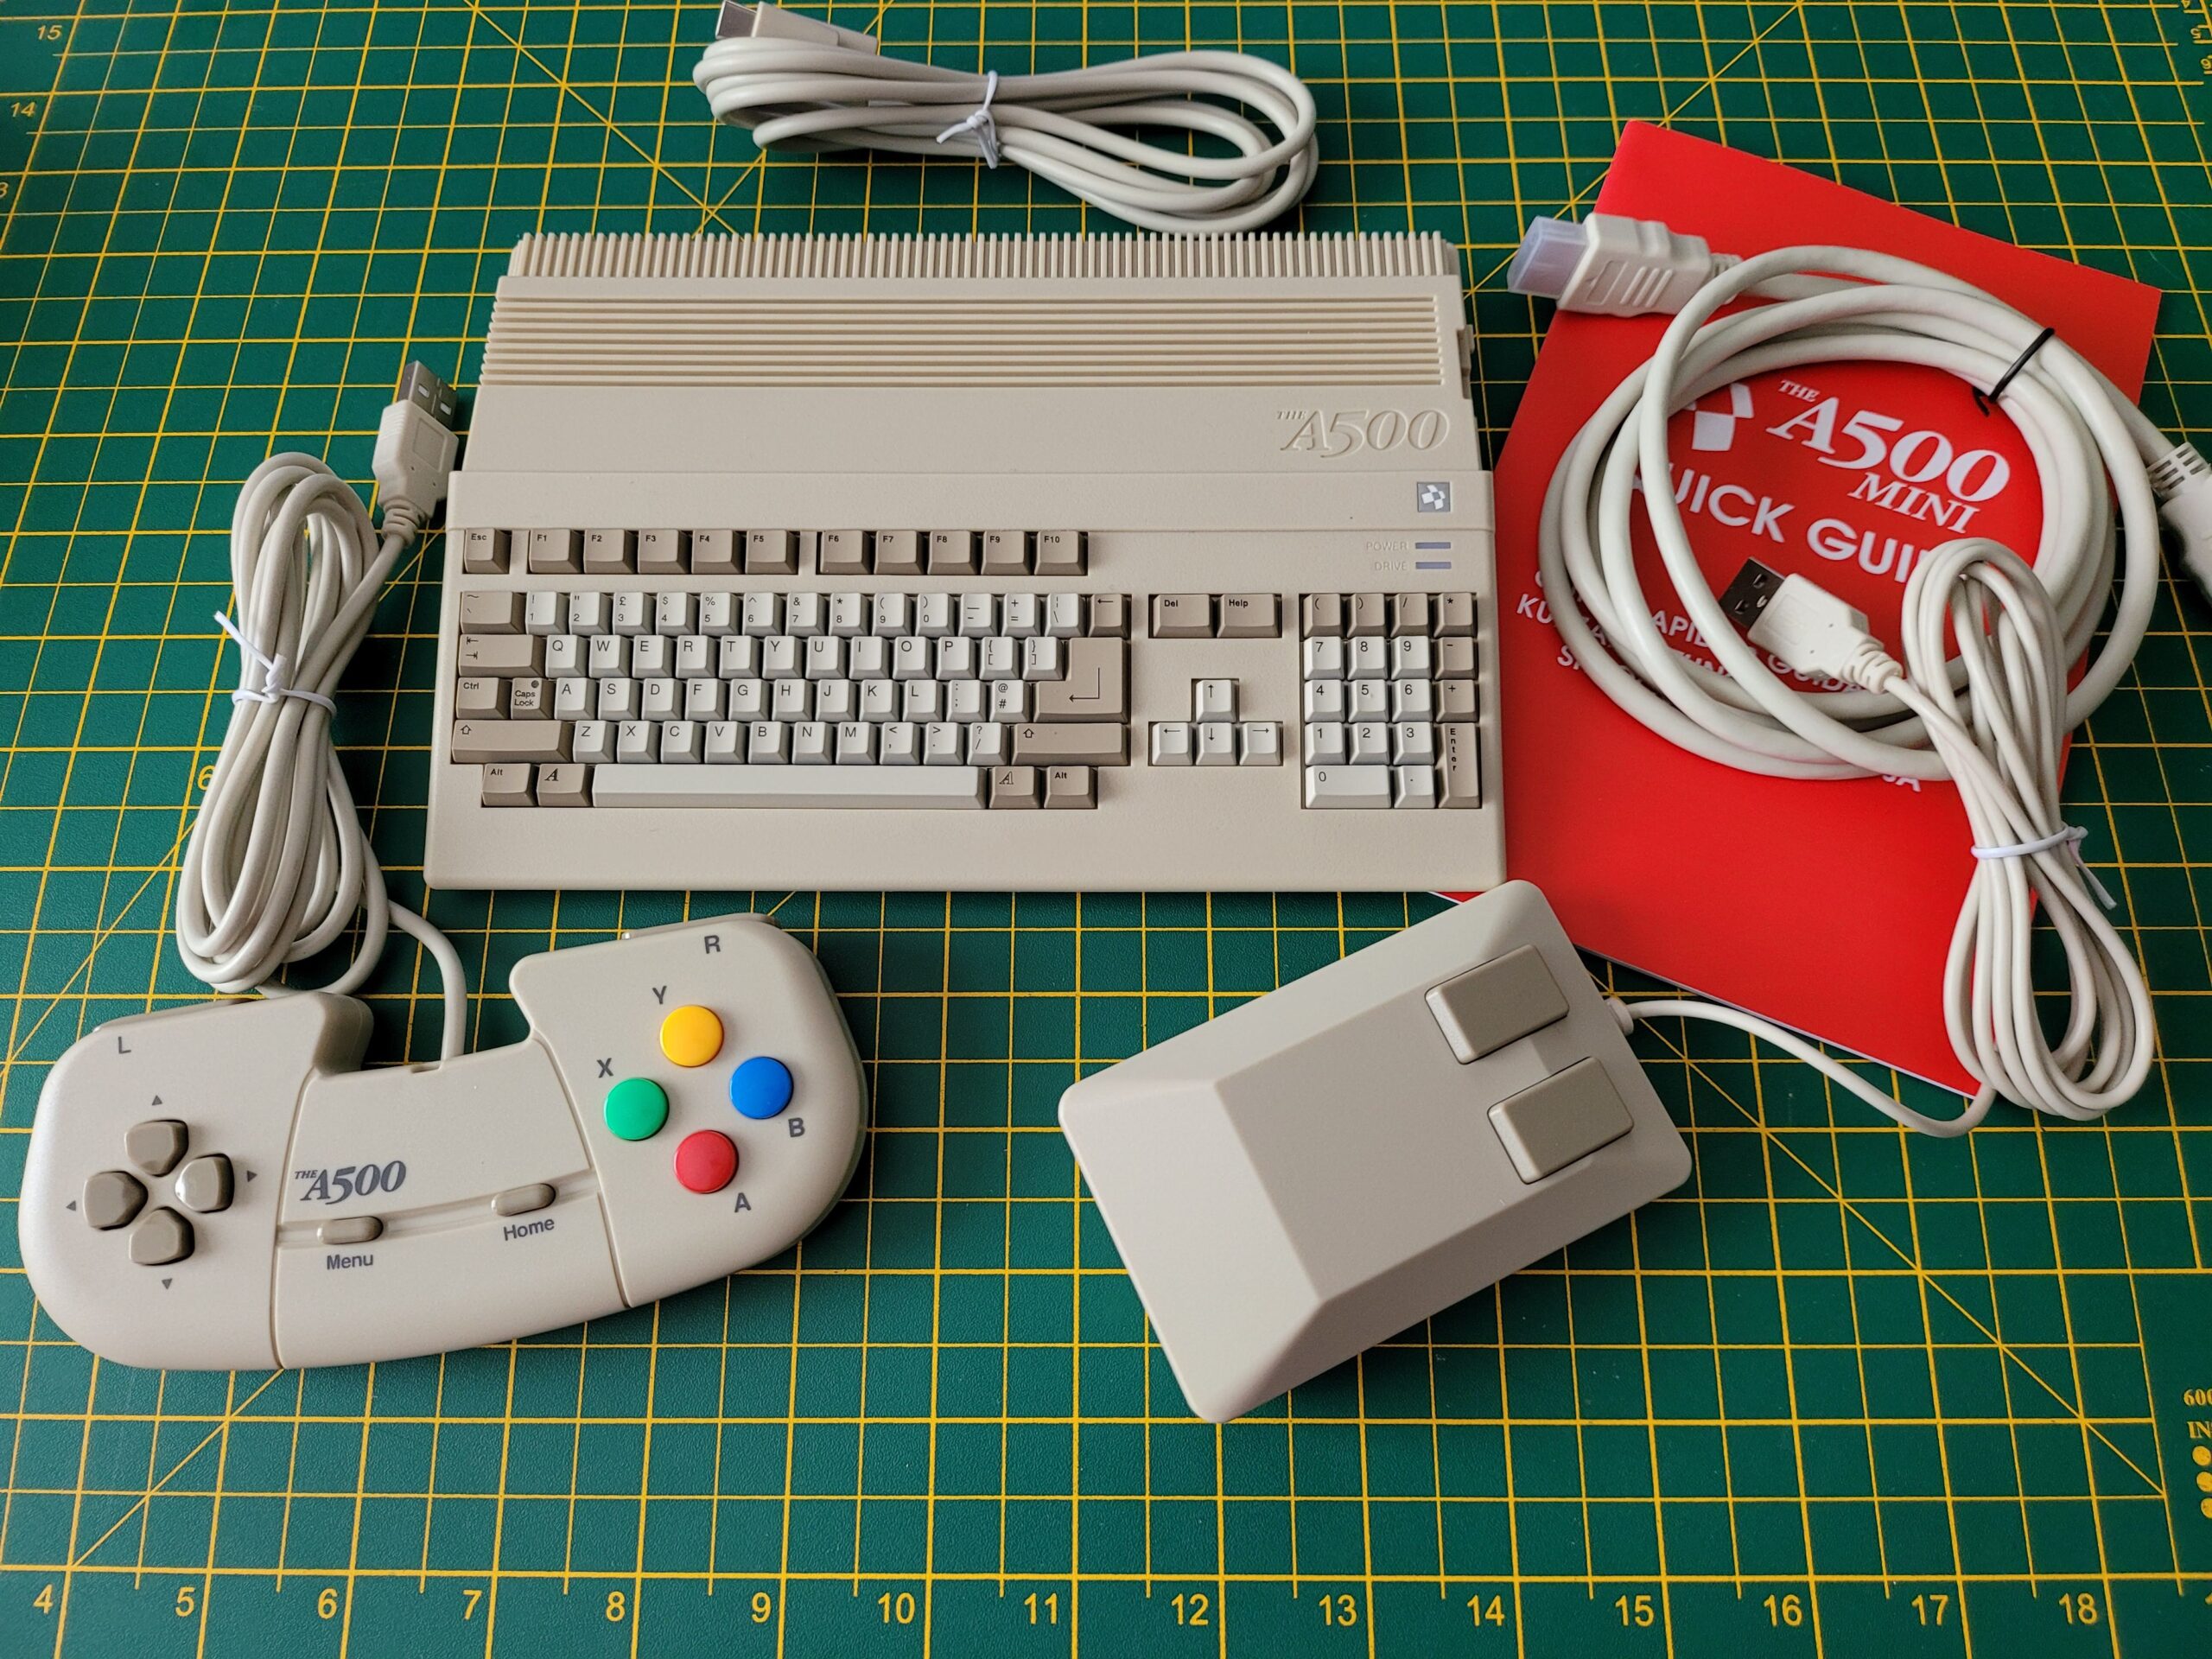 Hands-on review: The A500 Mini Retro Gaming Console